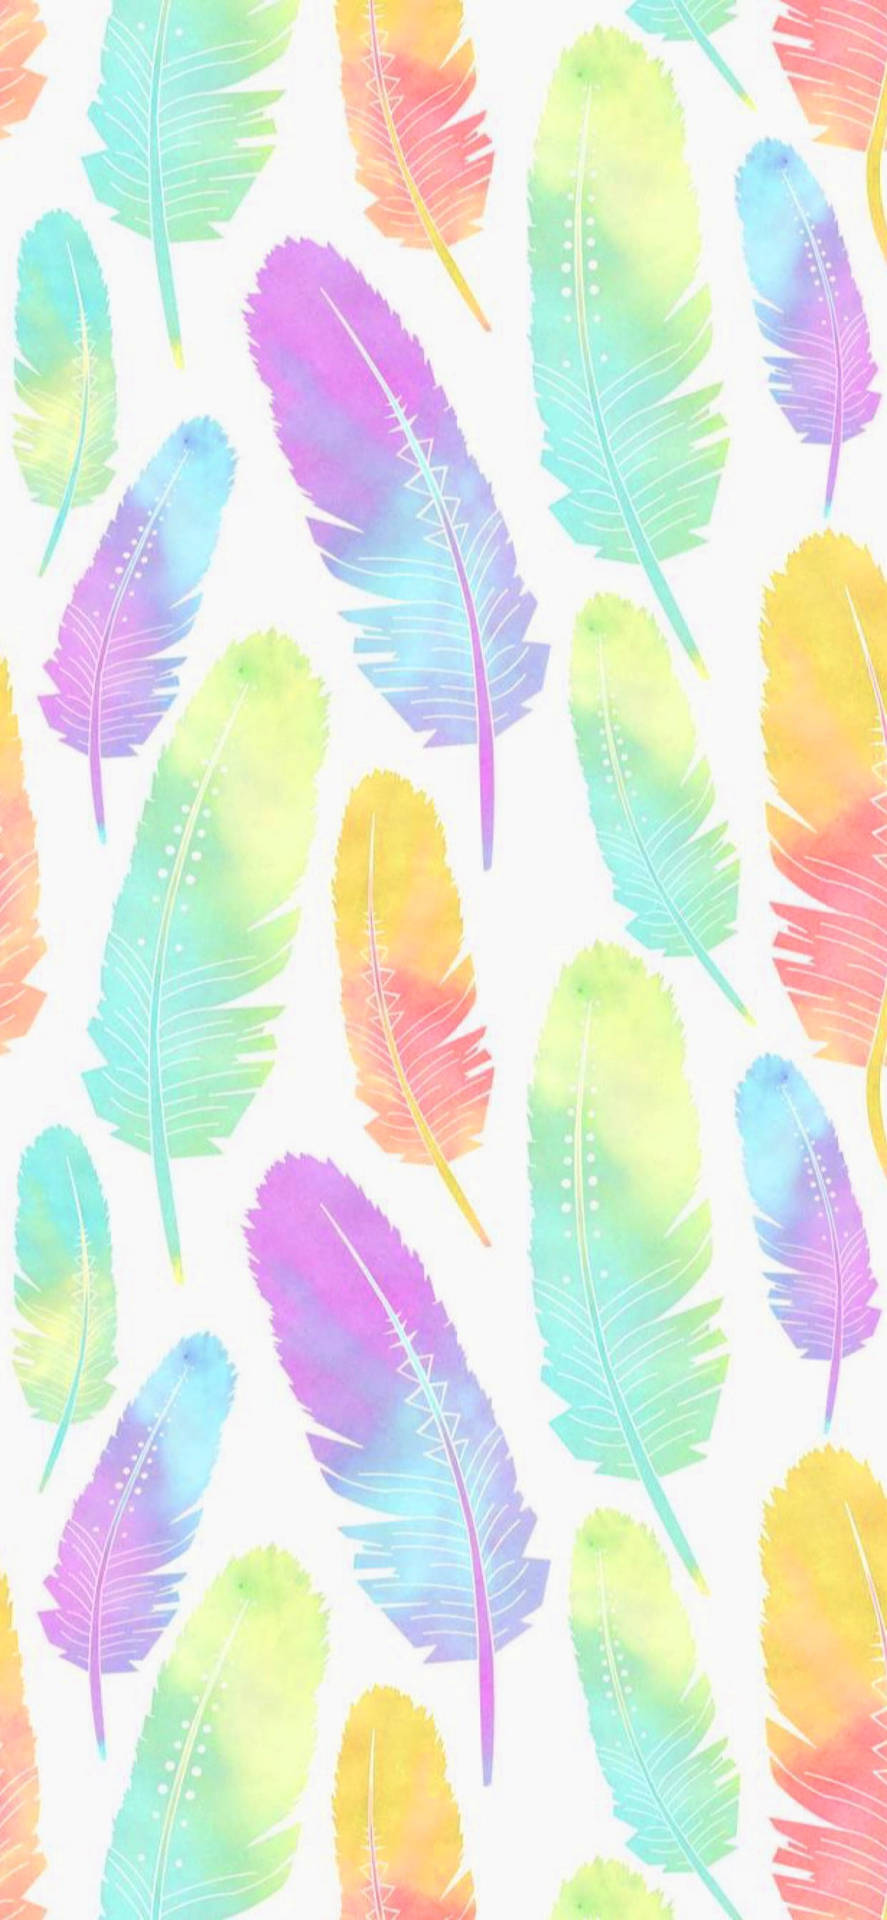 Feathers Cute Pastel Colors Wallpaper